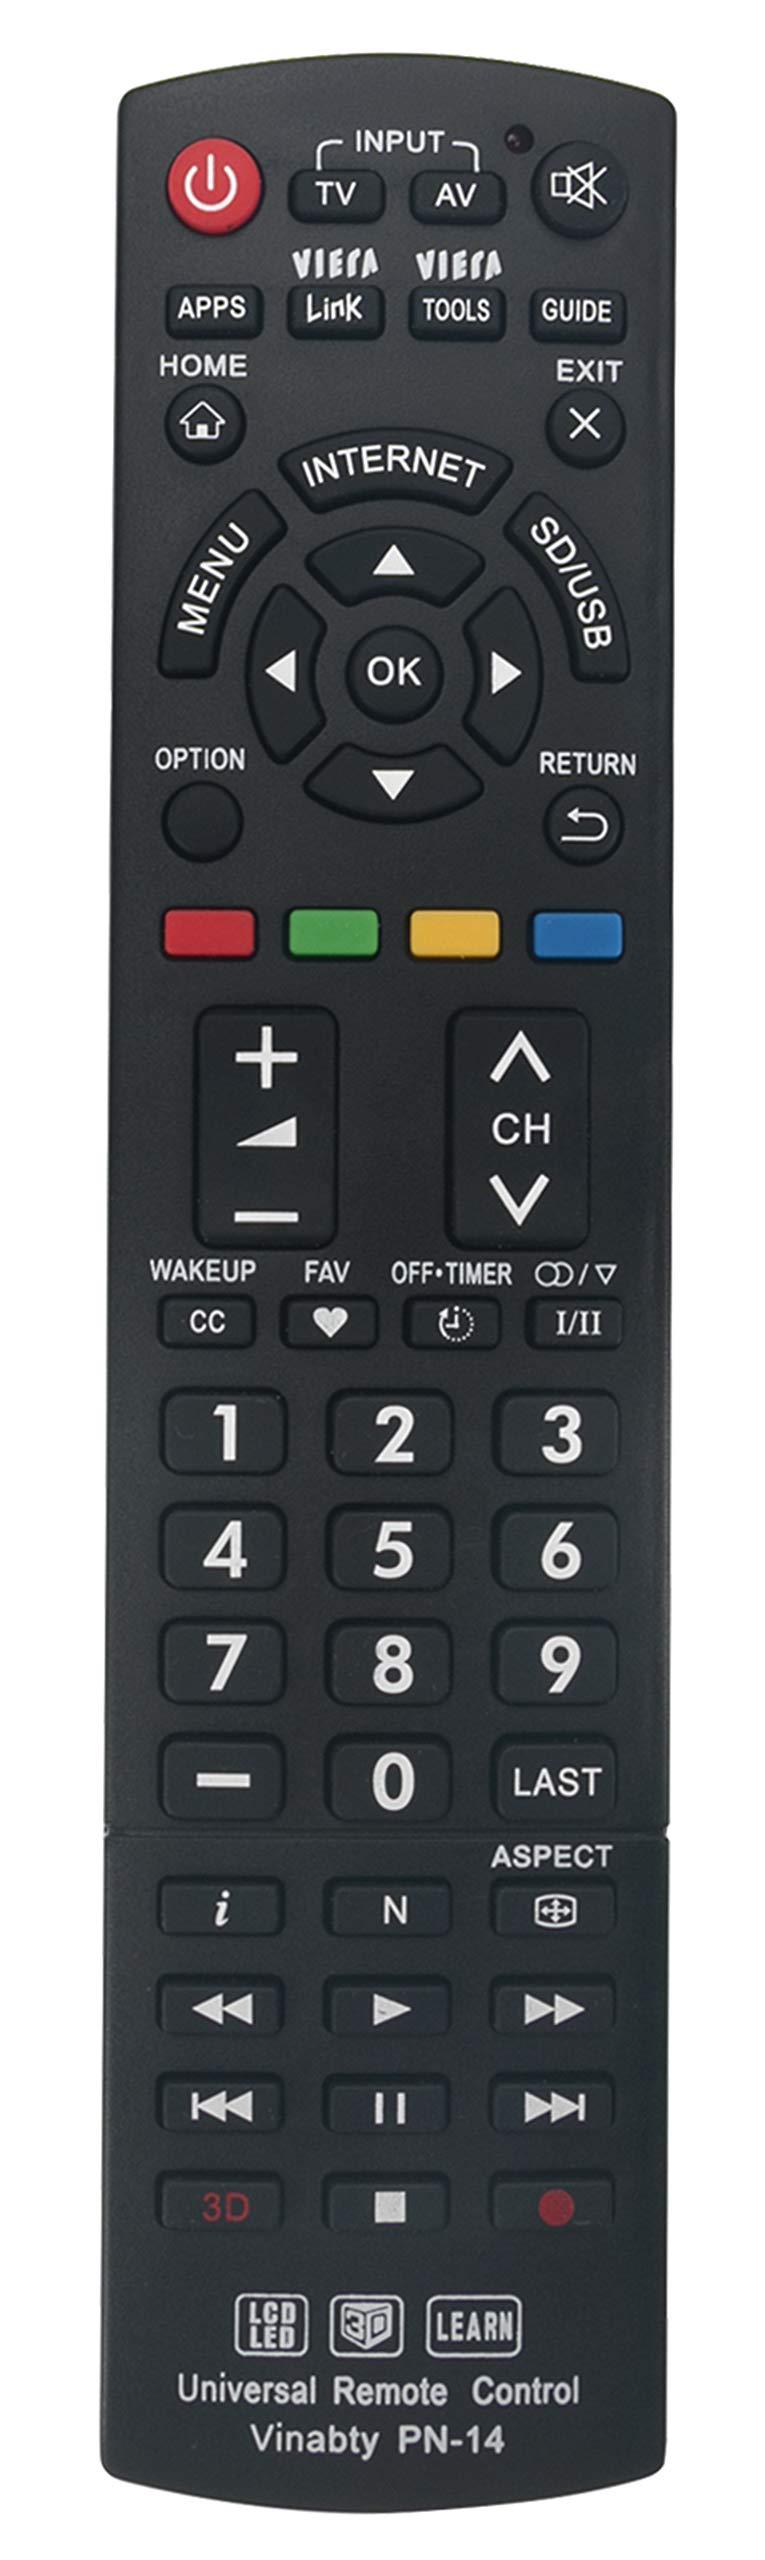 VINABTY New Replaced Remote fit for PANASONIC N2QAYB000486 N2QAYB000321 N2QAYB000485 N2QAYB000837 N2QAYB000926 N2QAYB000221 and Other 3D LCD LED HDTV TV